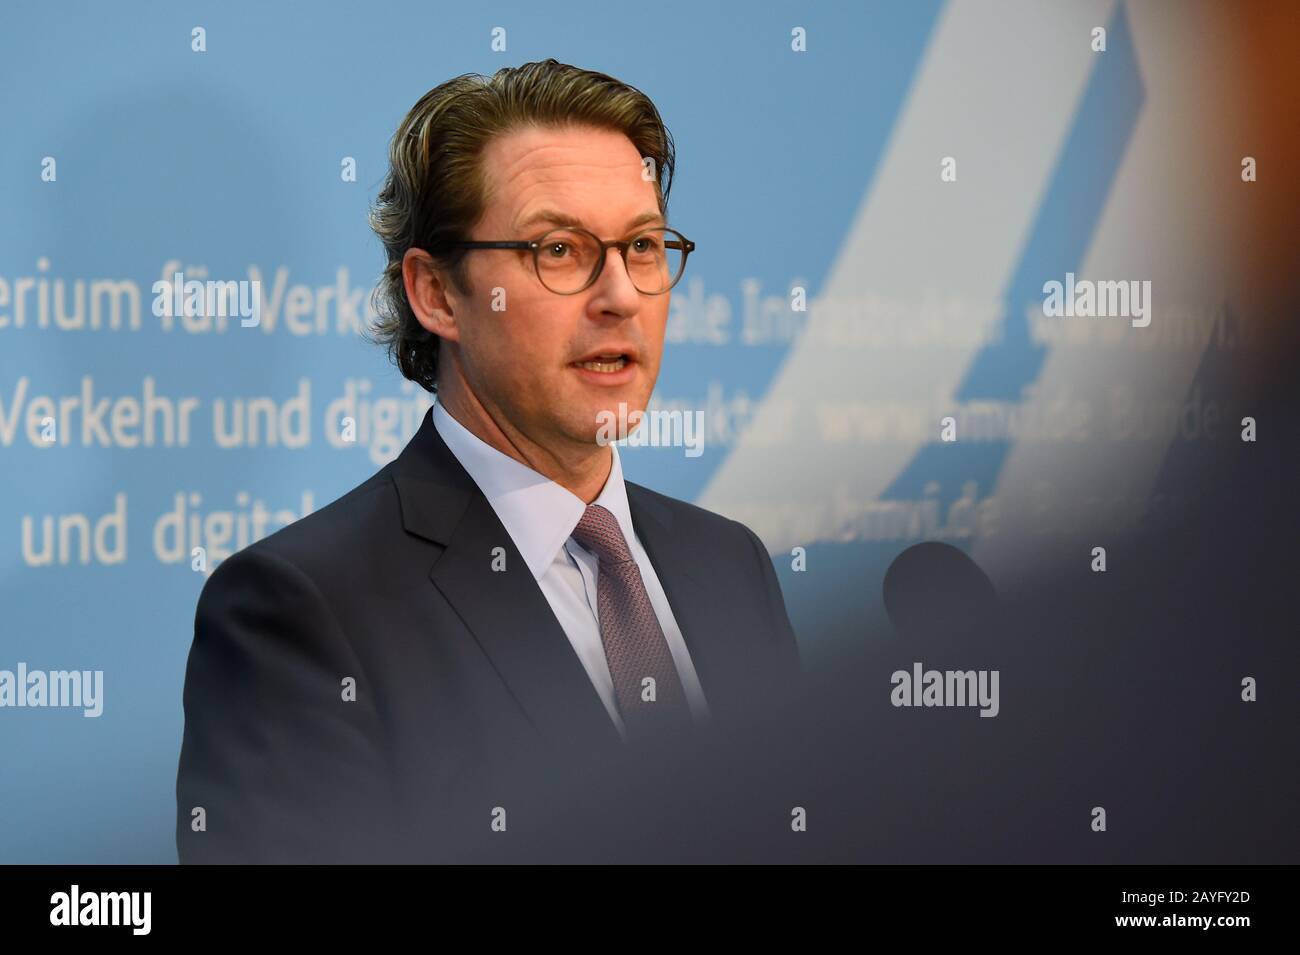 Berlin, Germany. 14th Feb, 2020. Federal Transport Minister Andreas Scheuer (CSU) will speak at a press conference on the topics of speed limits and drones in Berlin. Credit: Sonja Wurtscheid/dpa/Alamy Live News Stock Photo